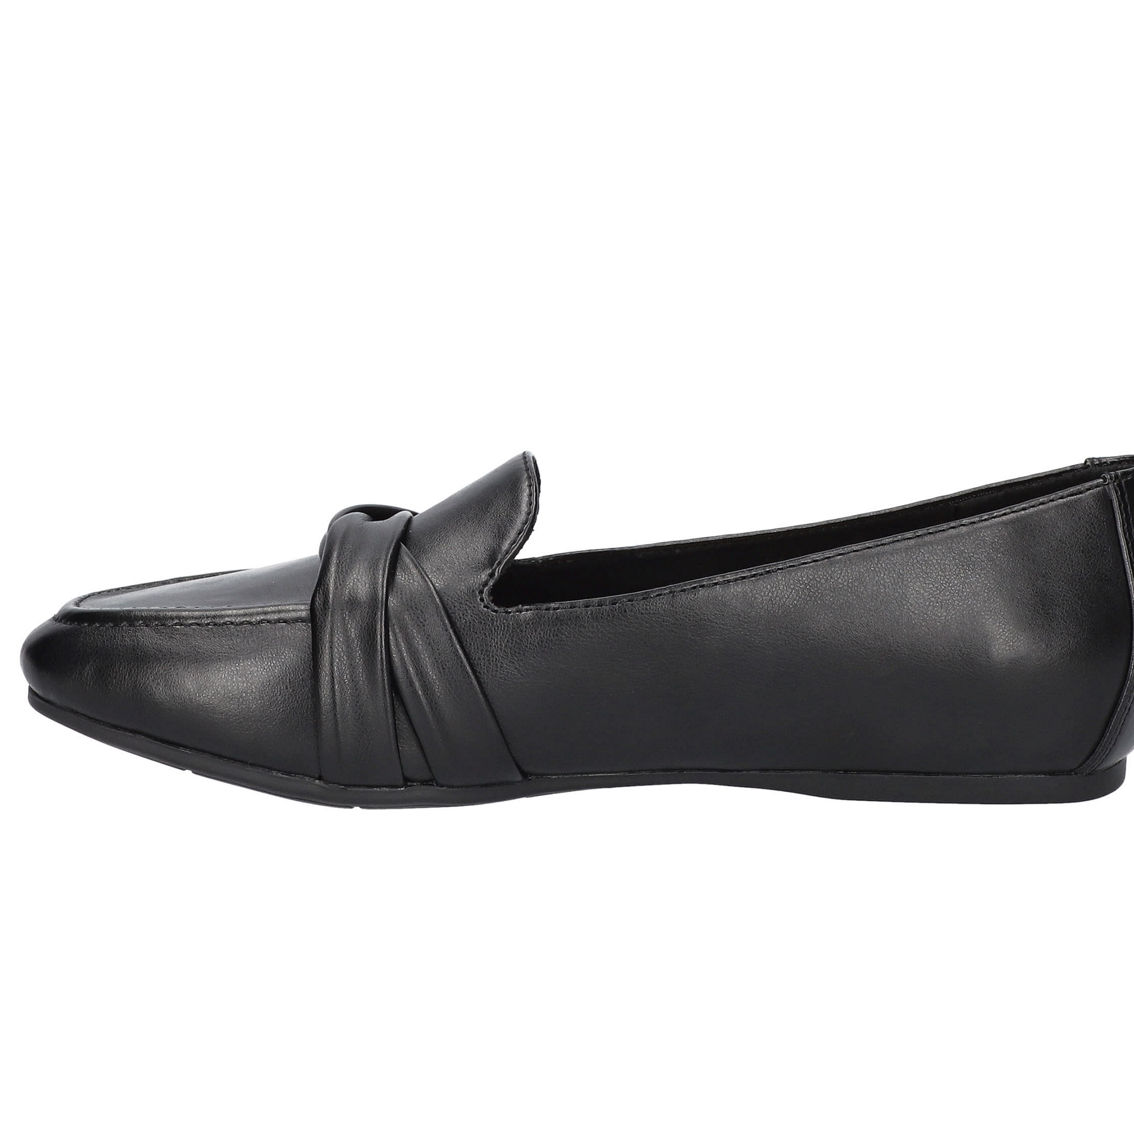 Betty by Easy Street Square Toe Flats - Image 5 of 5